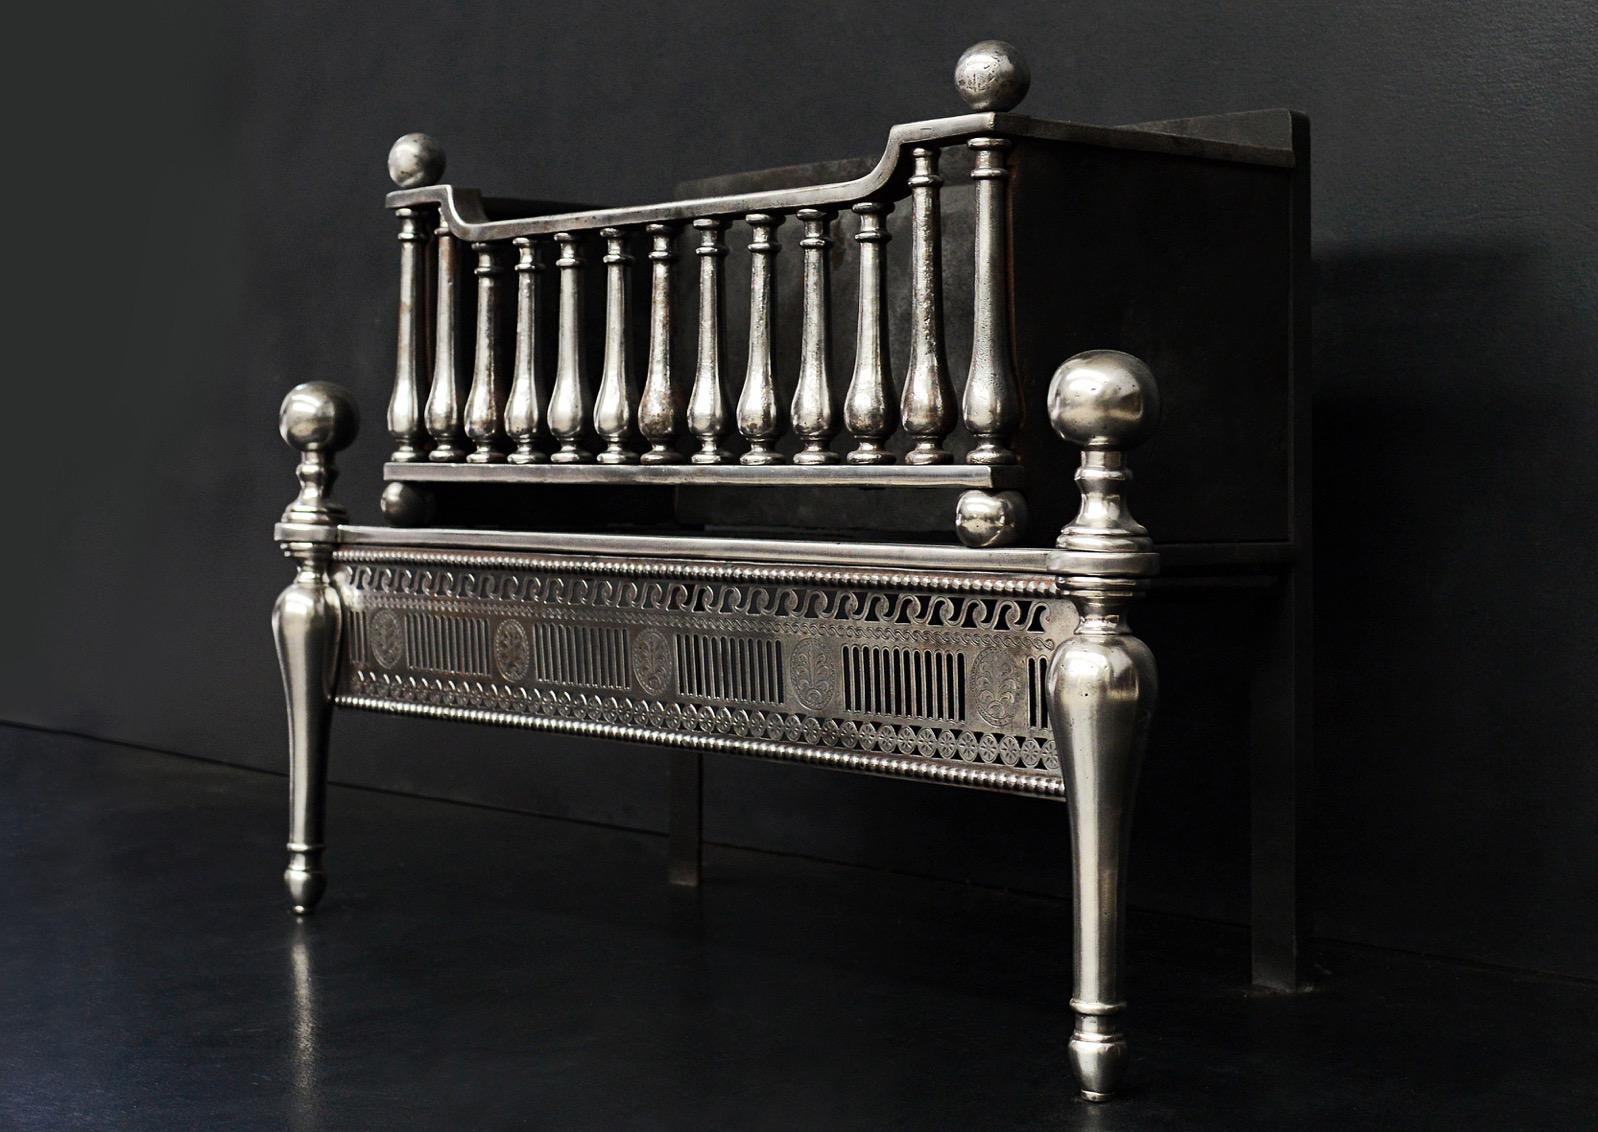 A good quality English polished steel firegrate. The engraved and fluted fret with beading above and below, the shaped legs surmounted by ball finials. The burning area with shaped upright bars surmounted by ball tops. 19th century.

Measures: